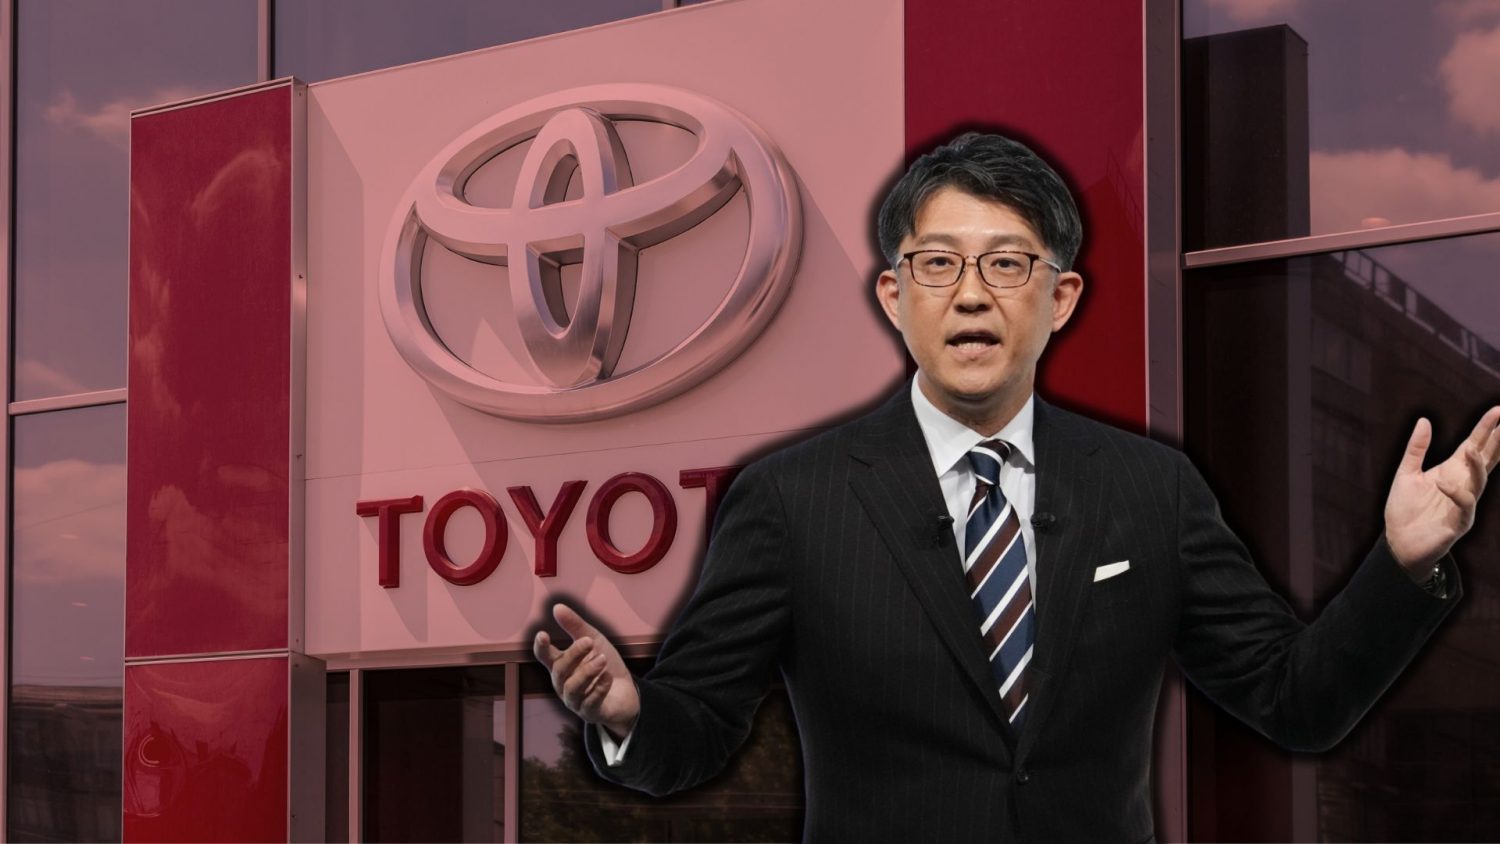 During a recent presentation in Tokyo, Toyota's Chief Executive emphasized the need for ICE vehicles to shift to achieve carbon neutrality.